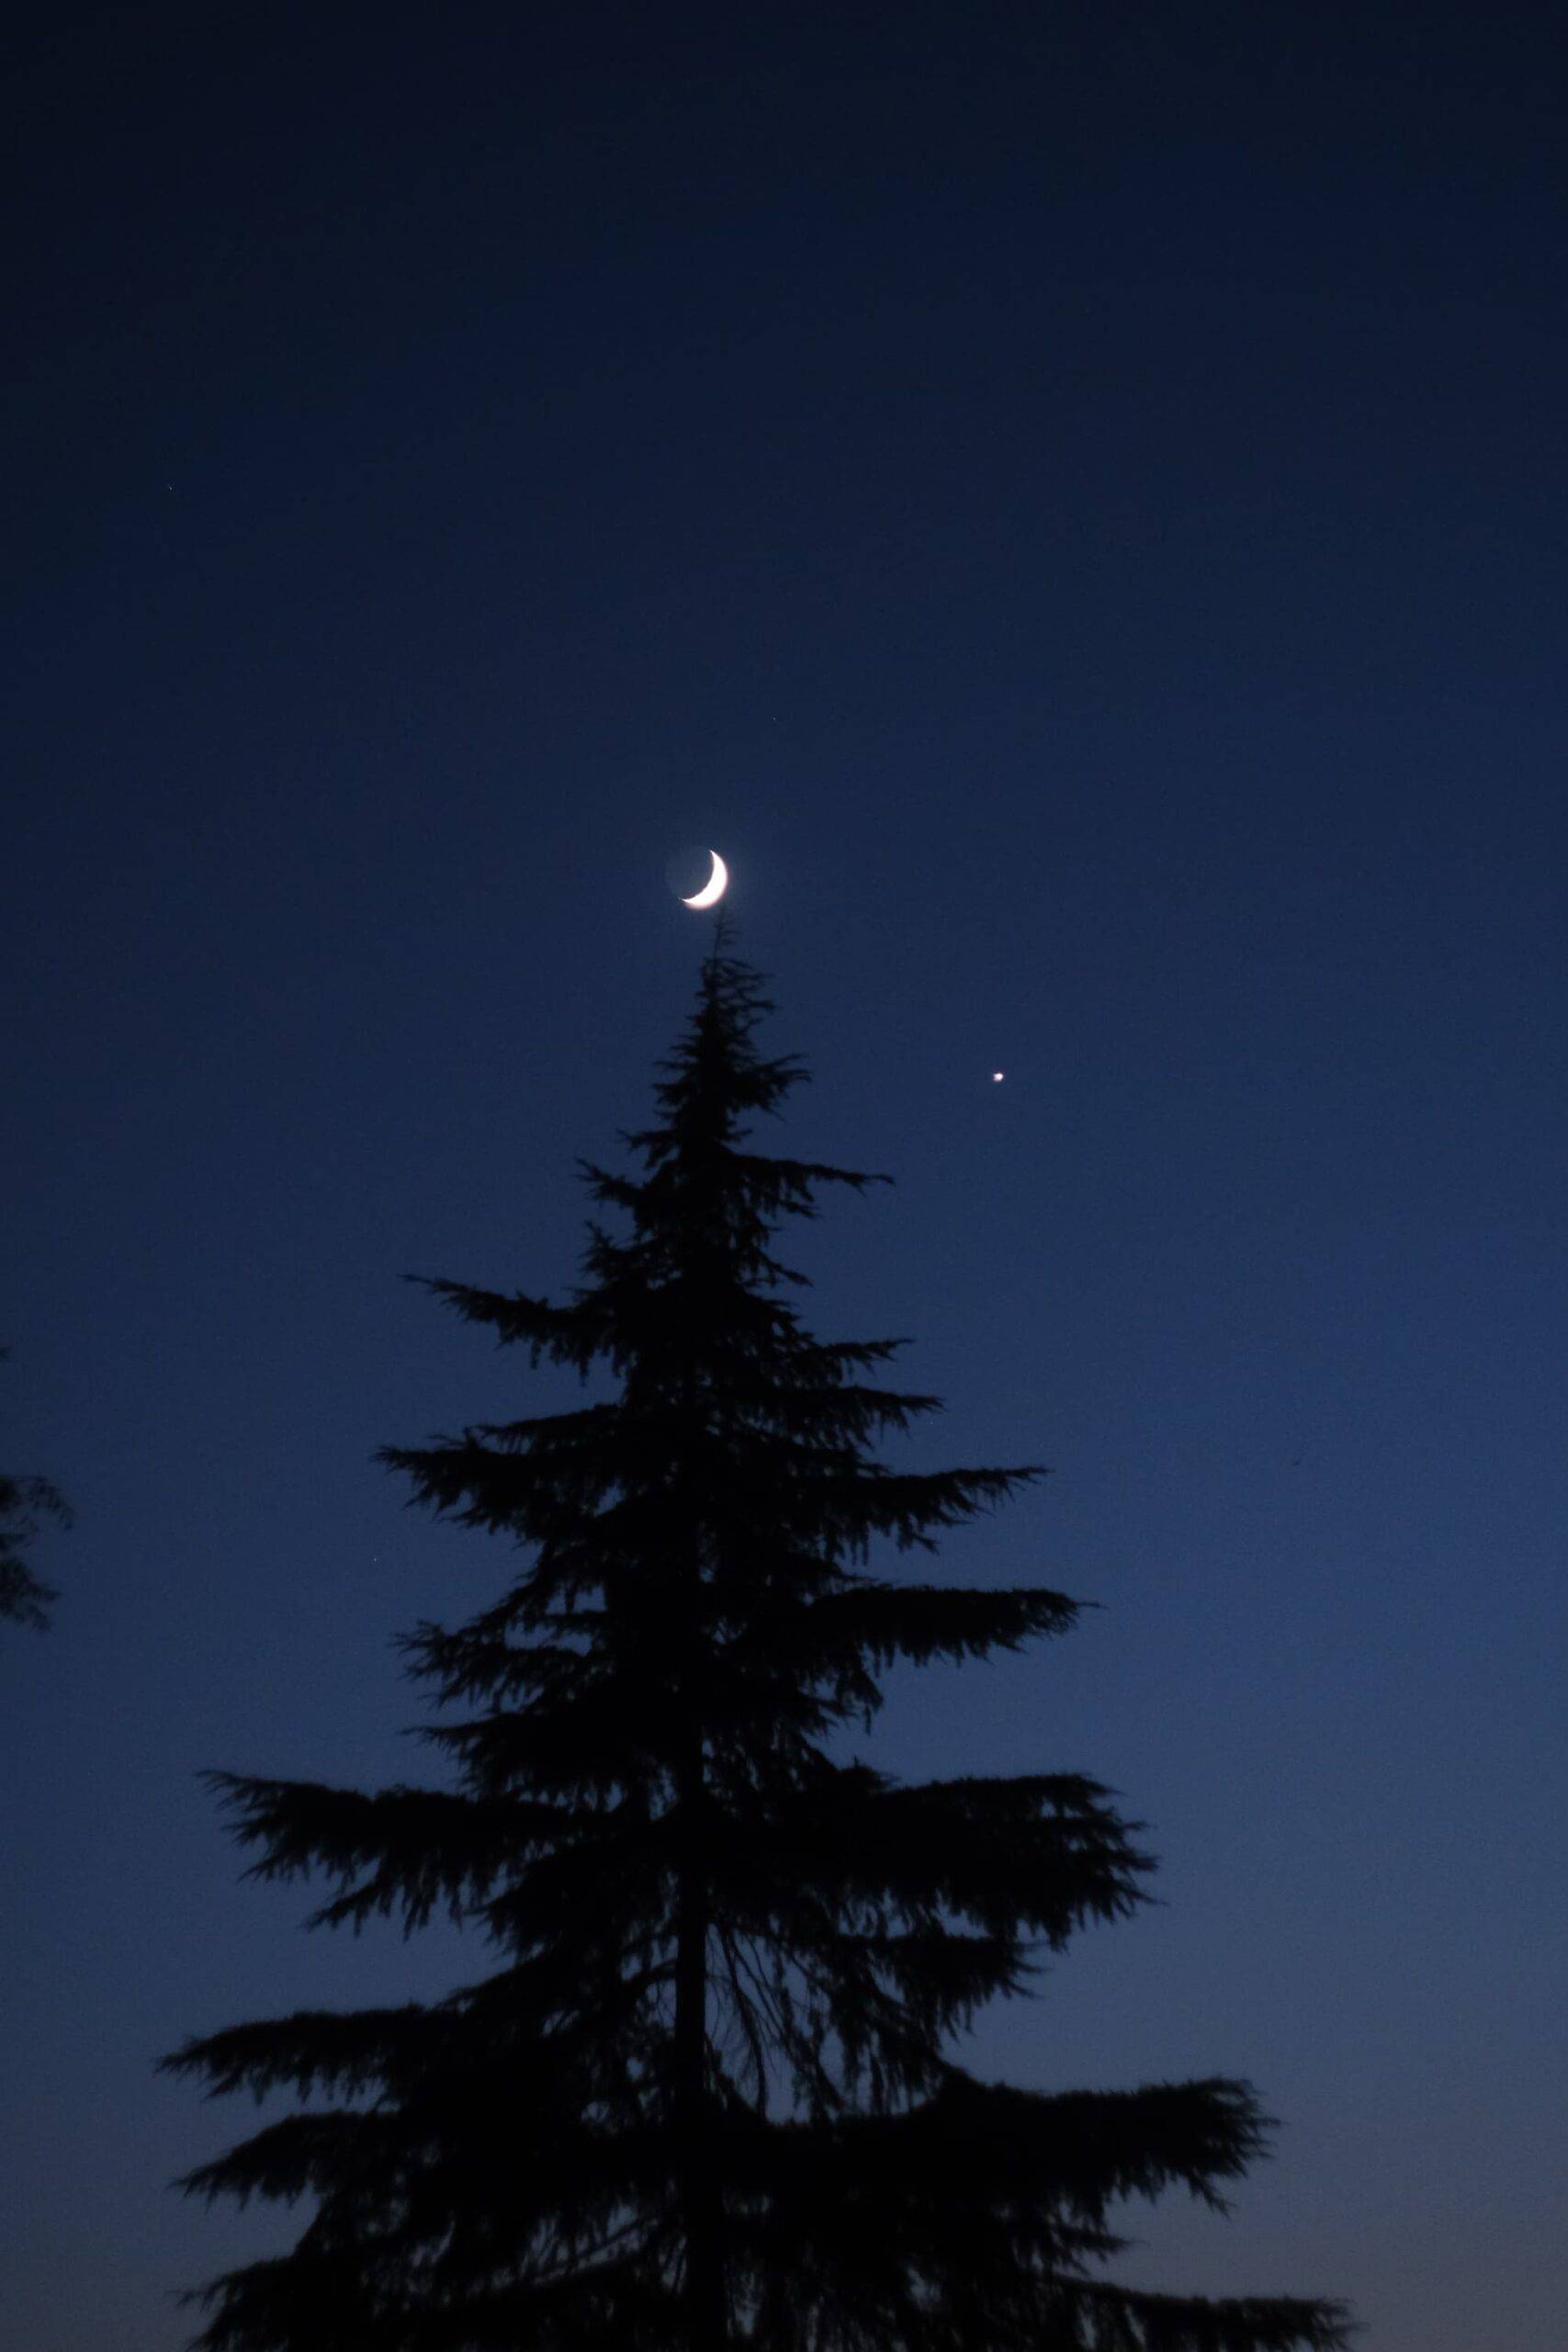 Night shot of new moon sitting on the top of pine tree